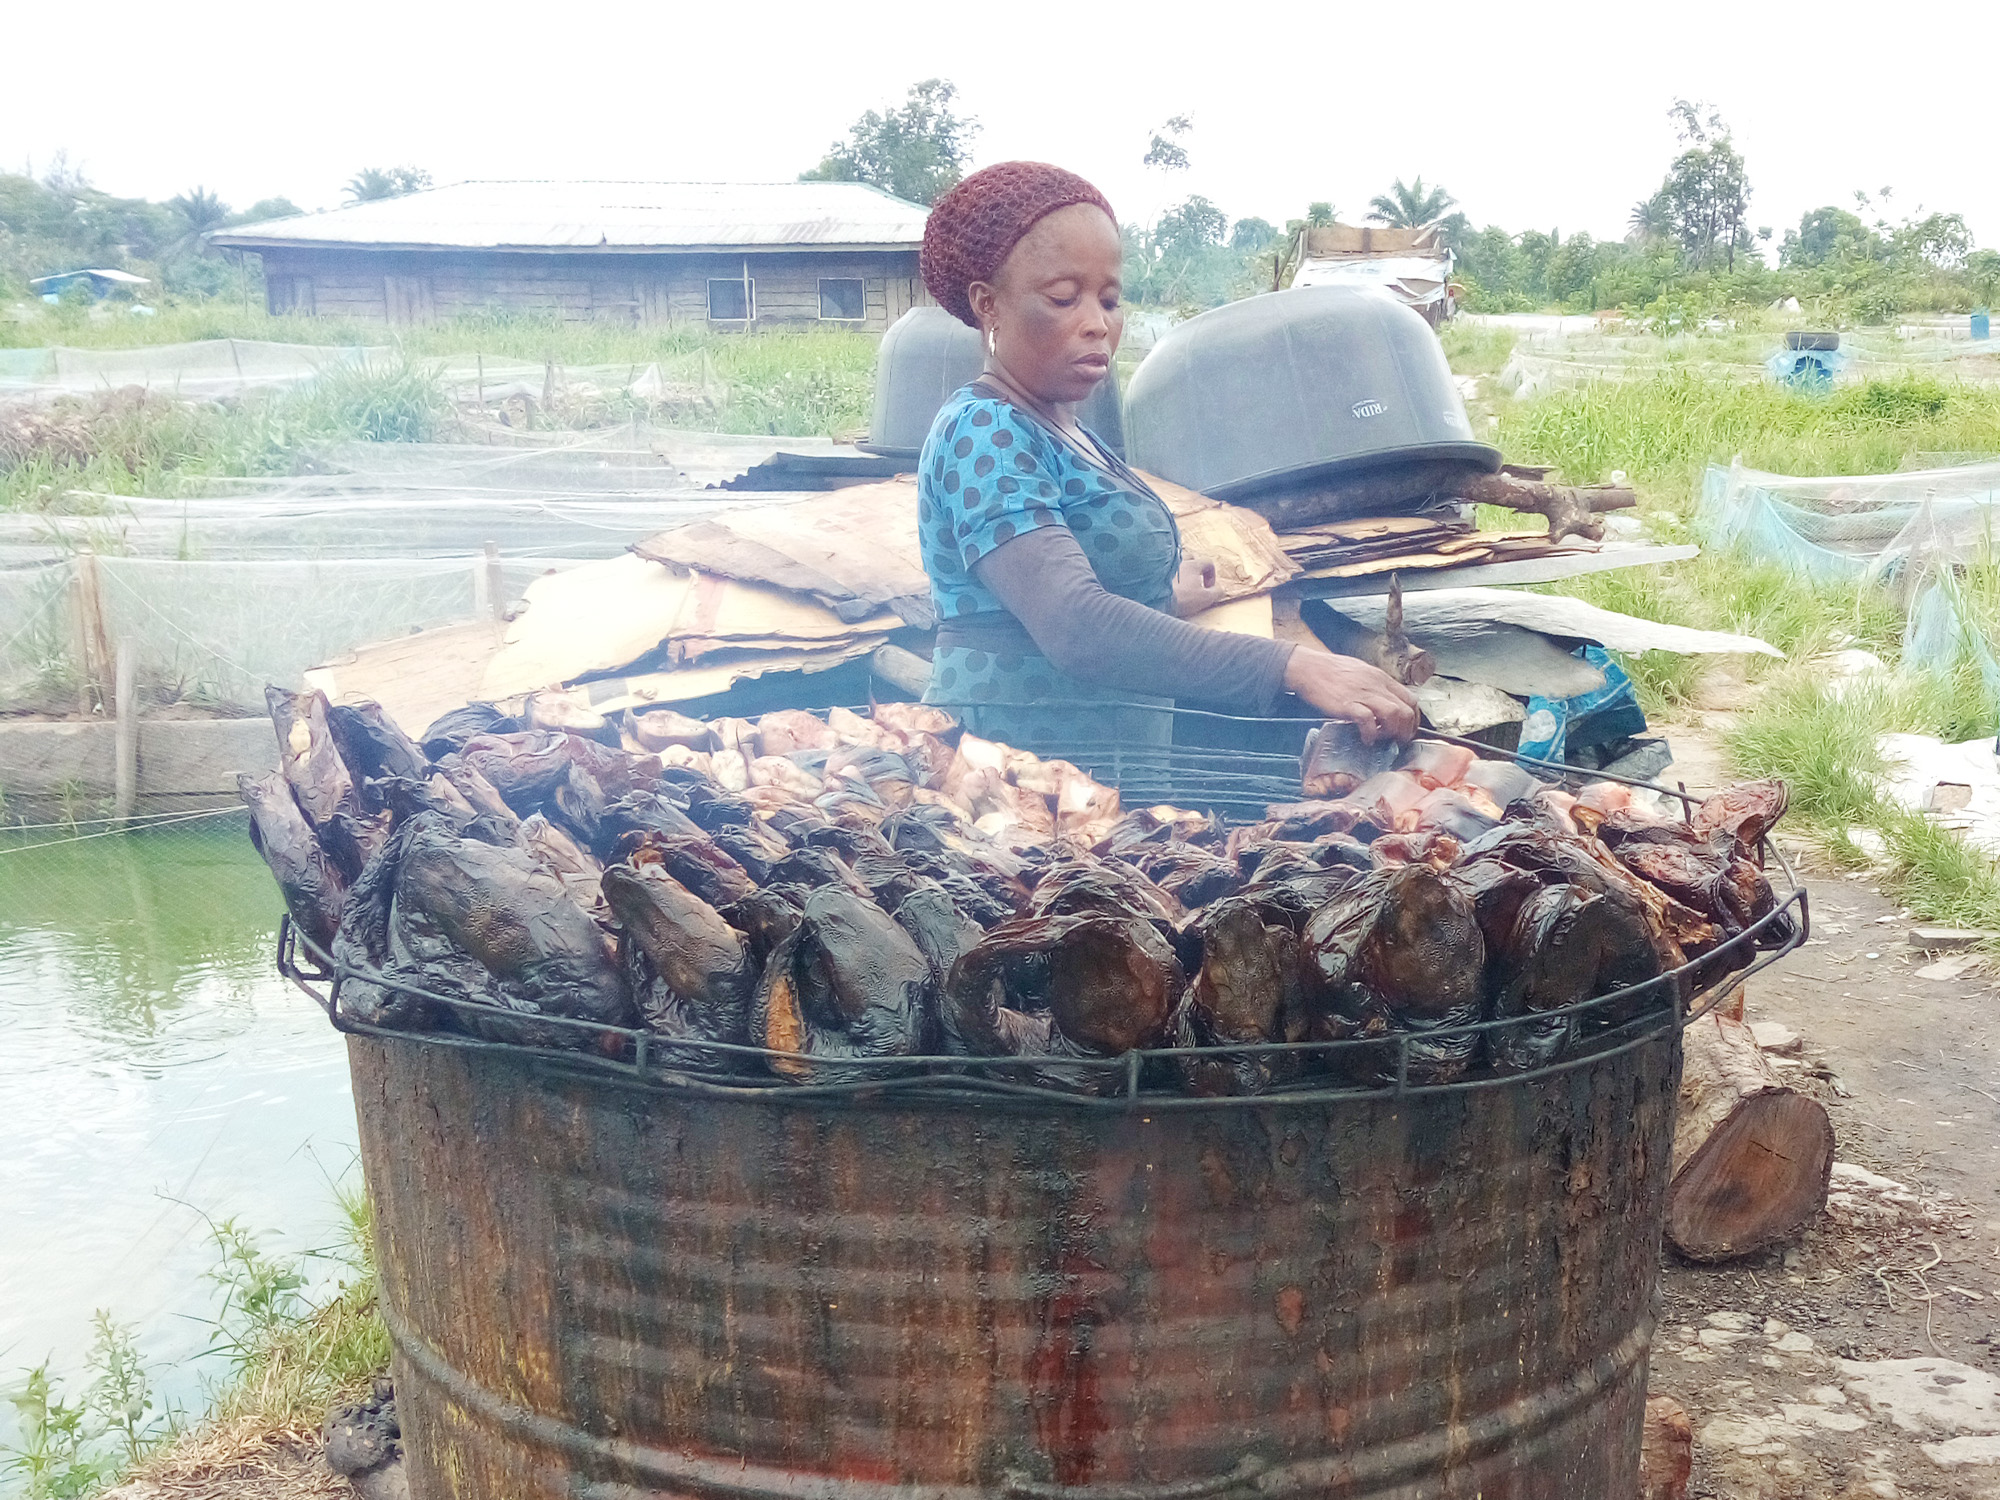 A Nigerian woman cooking fish